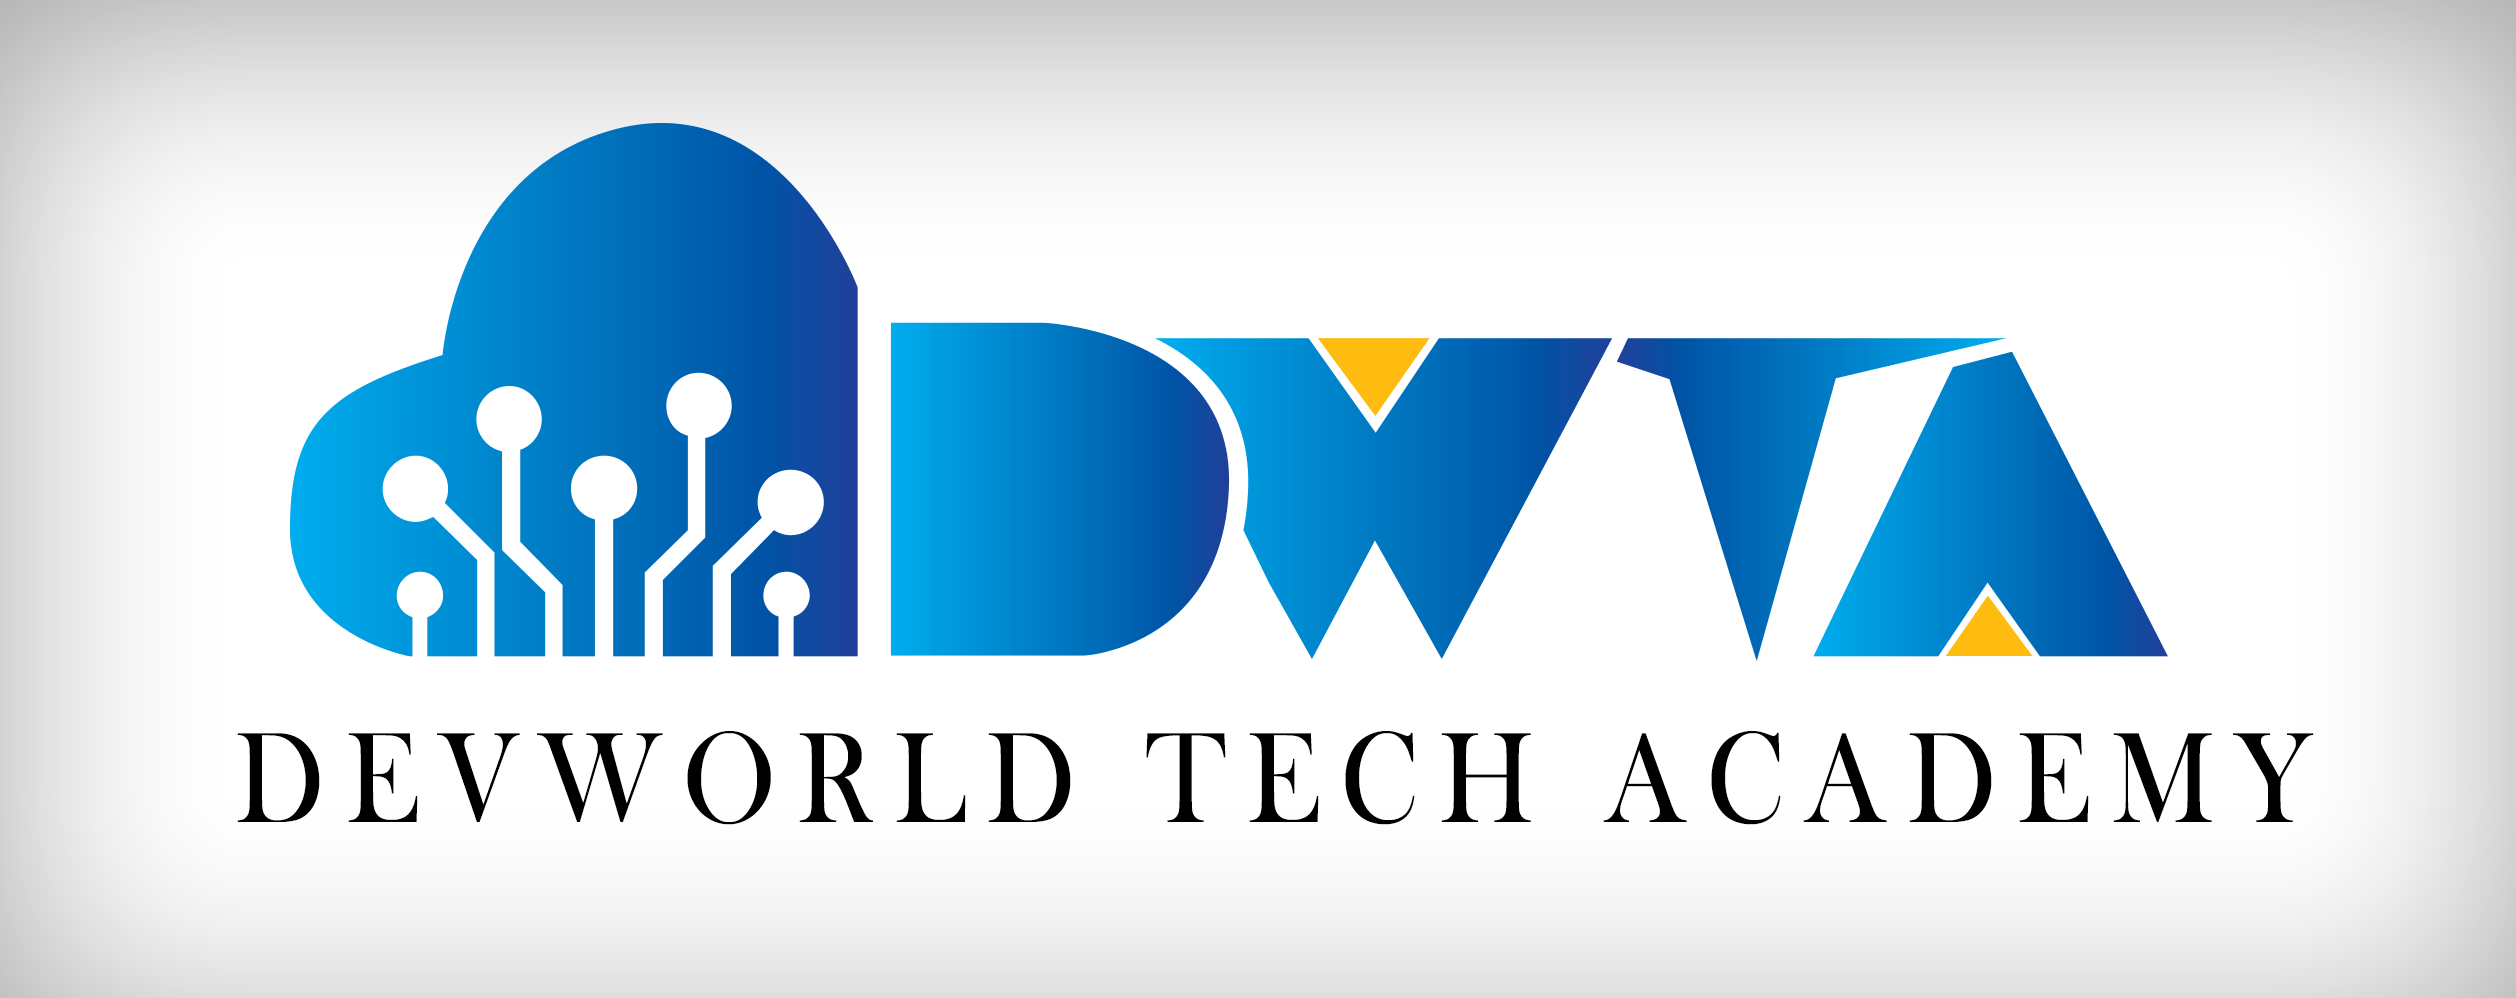 DWTA logo grey DevWorld Tech Academy - Learn Programming and Computer Courses through Real Projects - Best IT School in Accra, Ghana